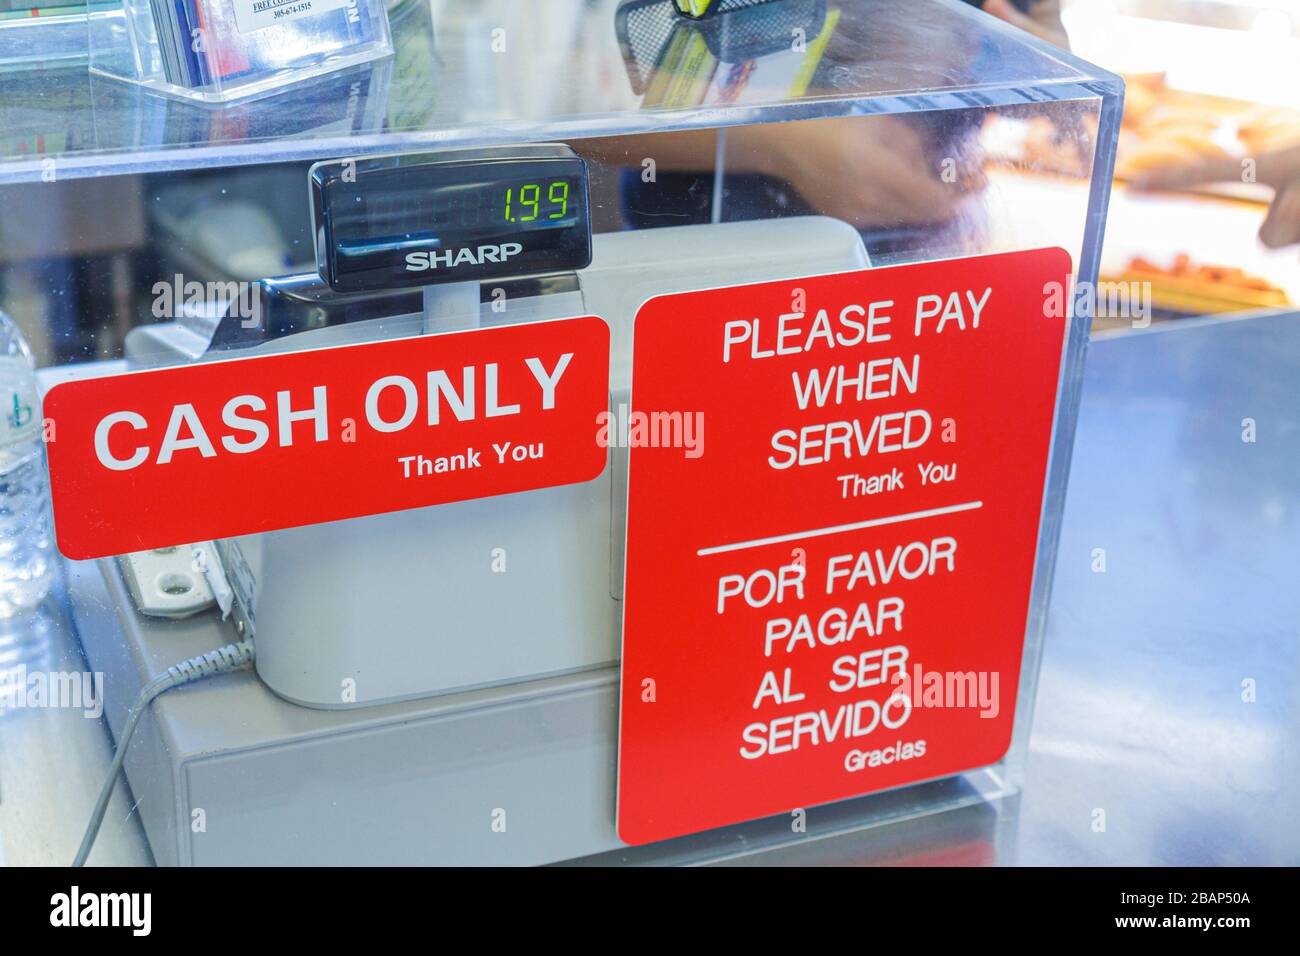 Miami Beach Florida,Sixth 6th Street,Las Olas Cafe Cuban cafeteria restaurant,sign cash only Spanish English language,bilingual please pay when served Stock Photo